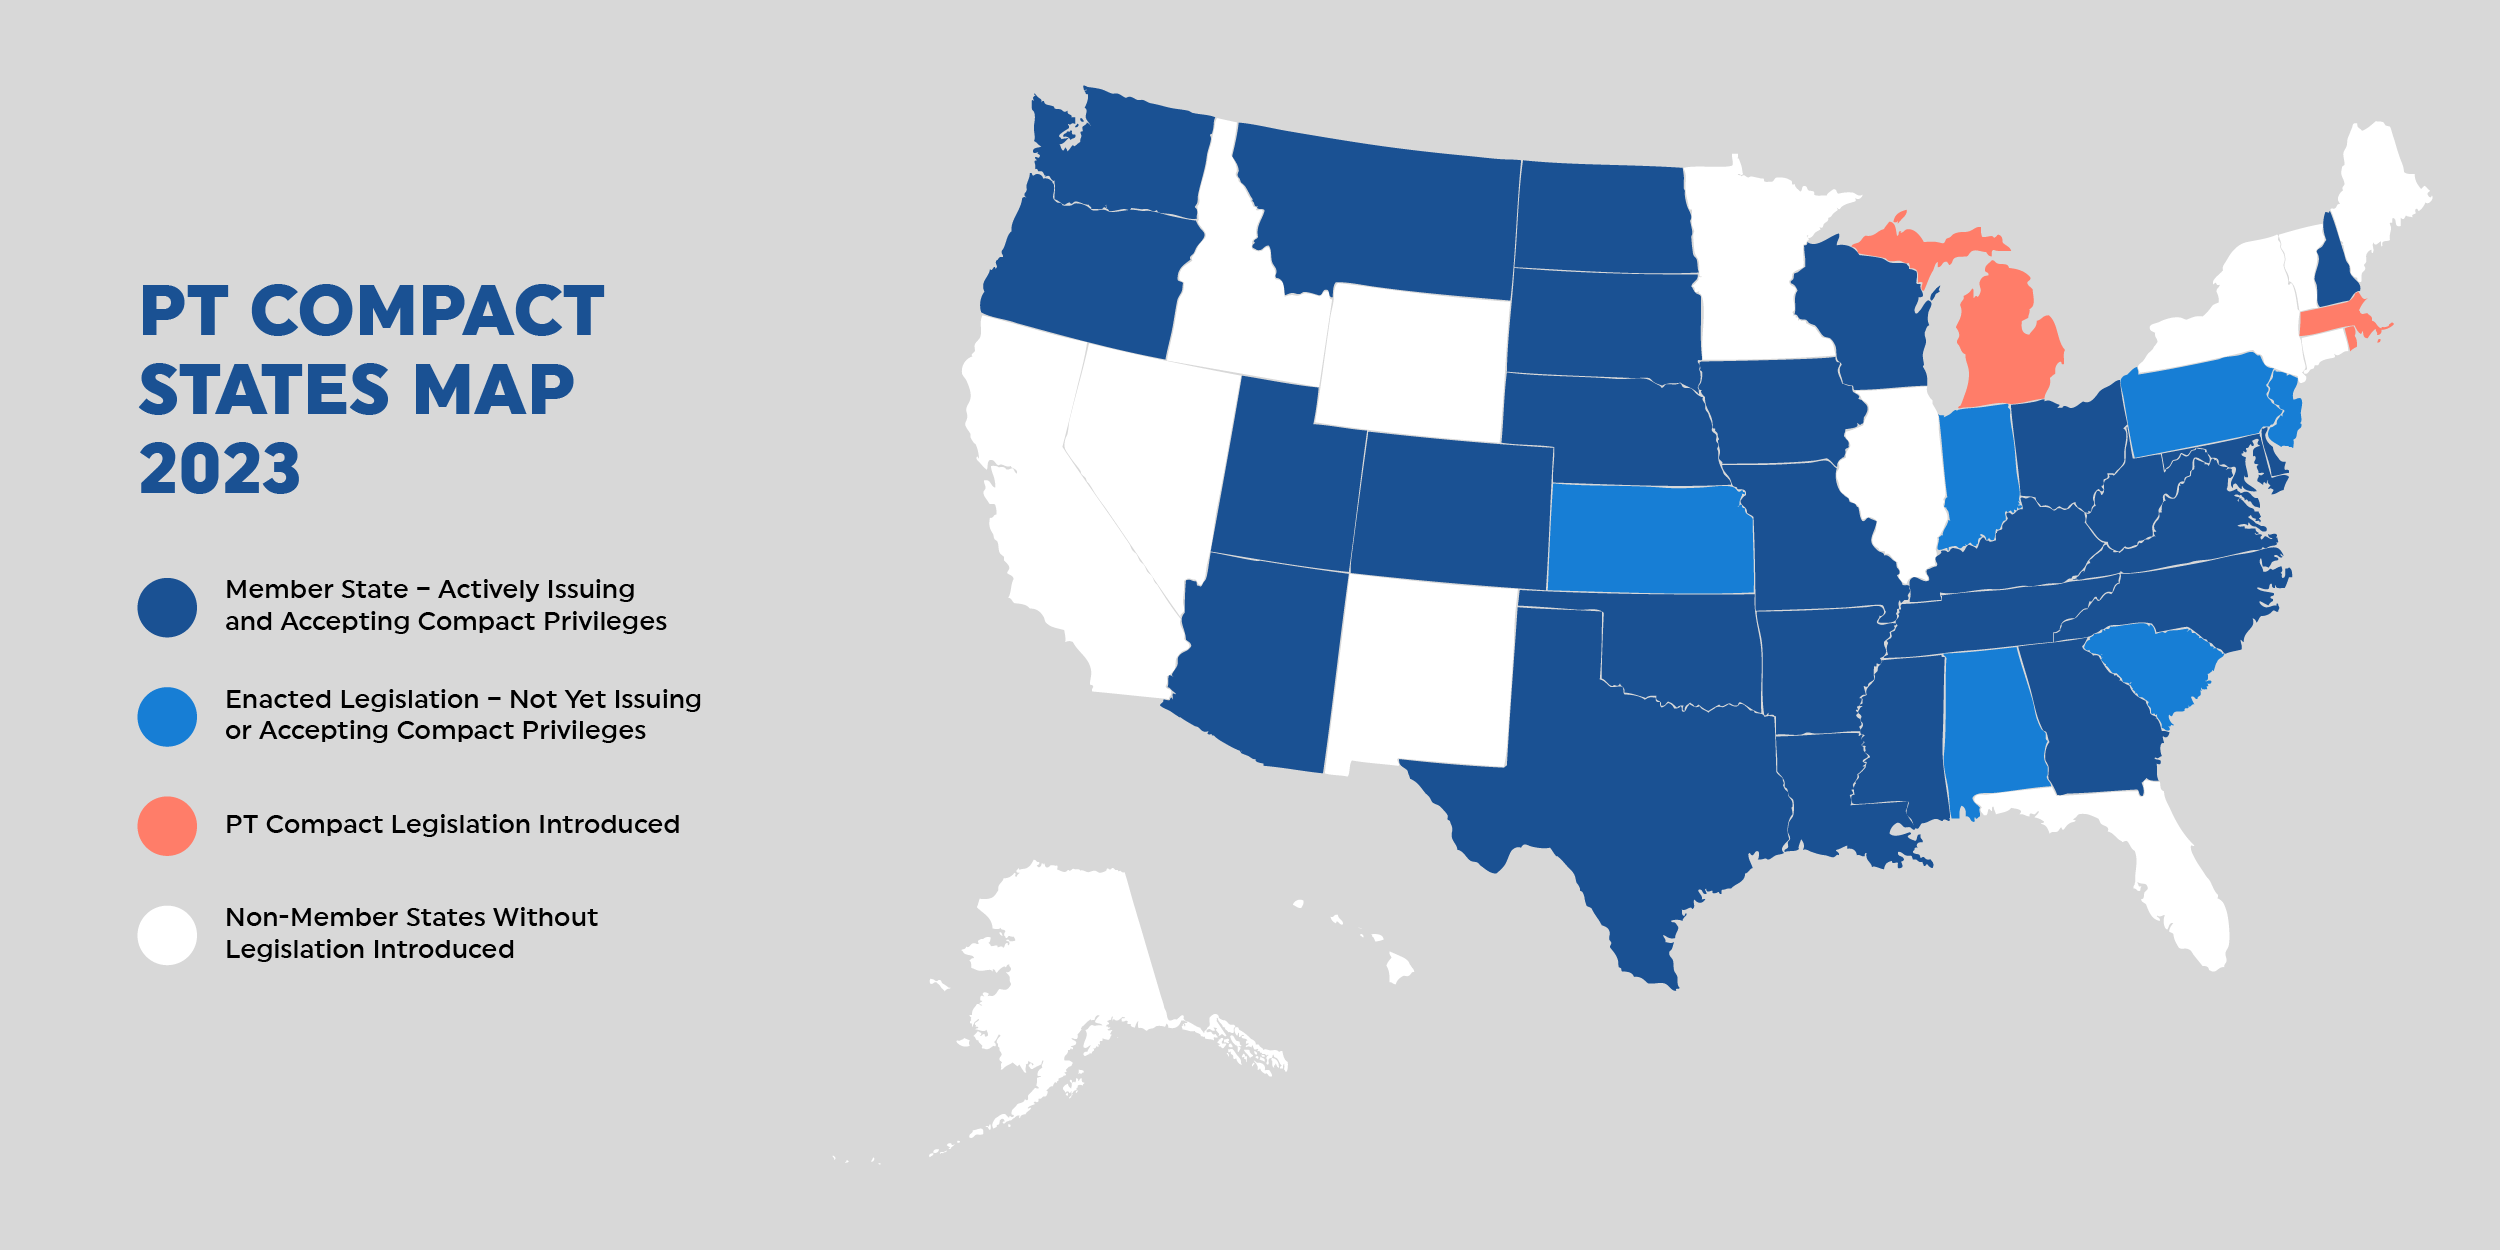 Infographic of a U.S. map representing the states participating in the PT compact.